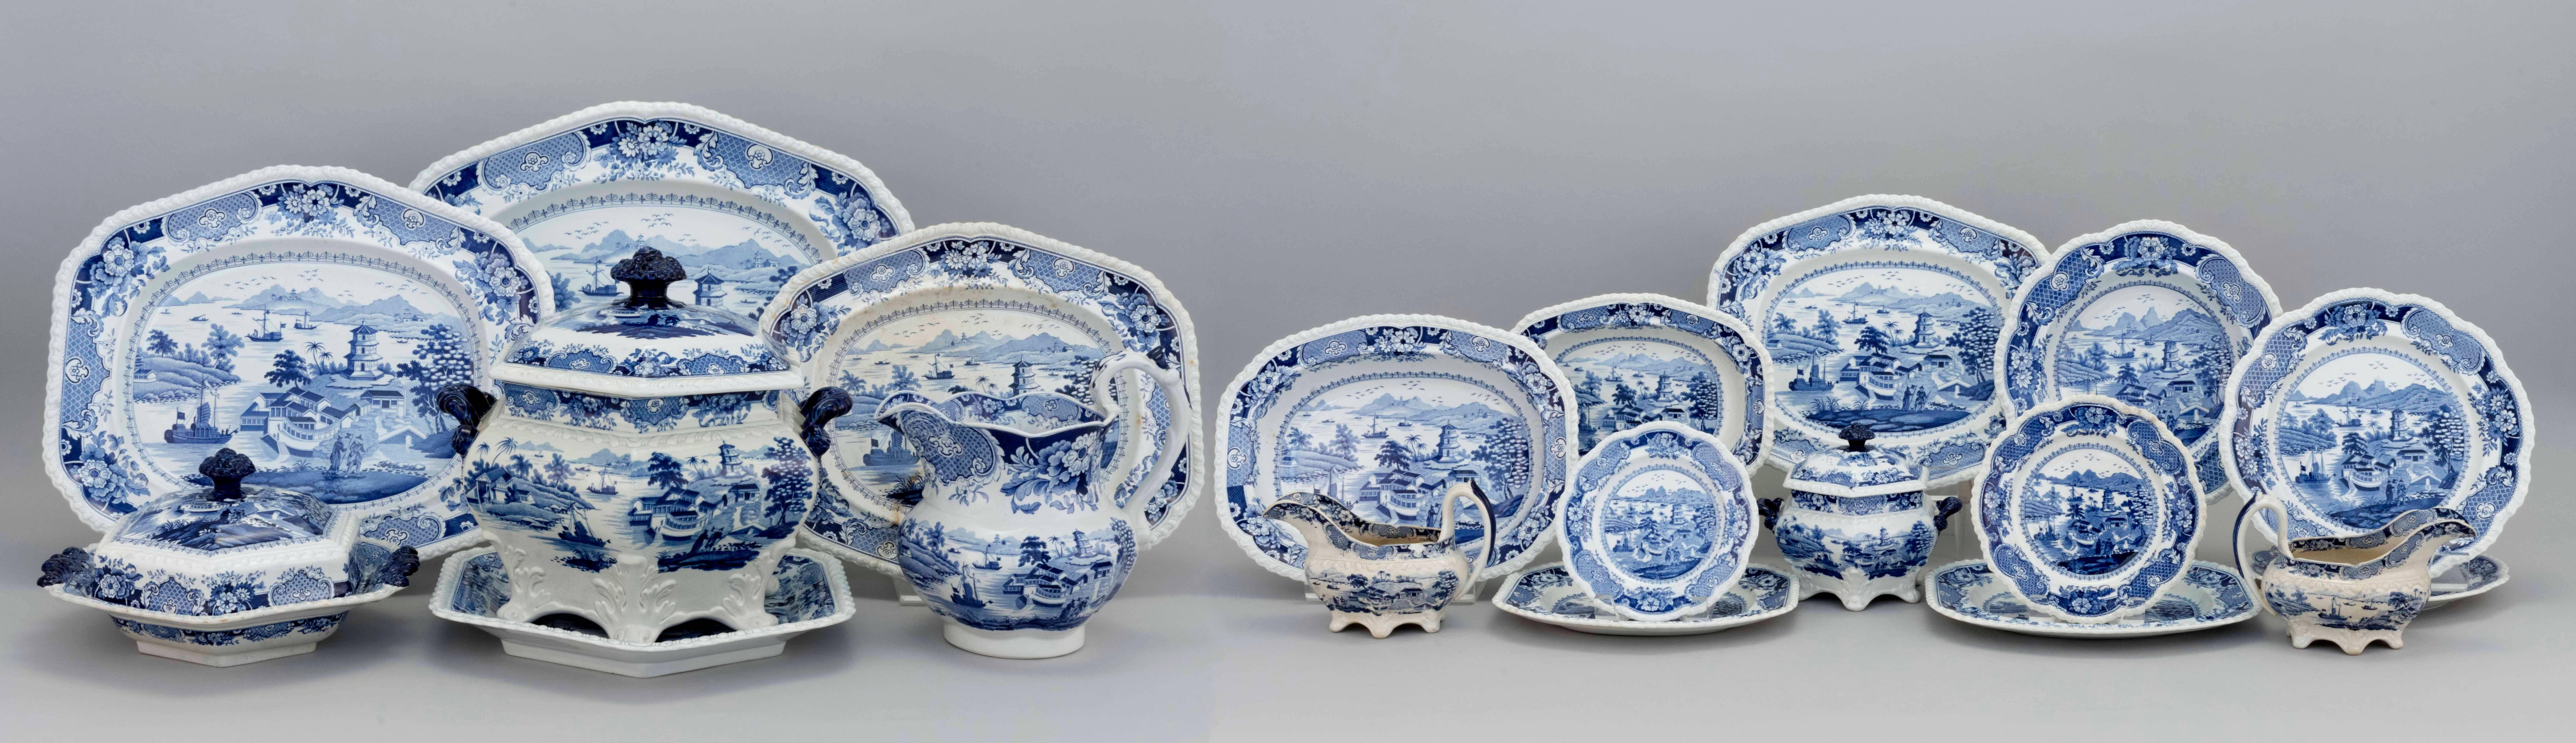 A beautiful blue and white Ridgway Staffordshire porcelain partial dinner service, including the following: 23 10 inch dinner plates, 17 8.75 inch plates, 8 7.25 inch plates, 2 6.5 inch plates, 11 10.25 inch bowls, six platters (various sizes), one